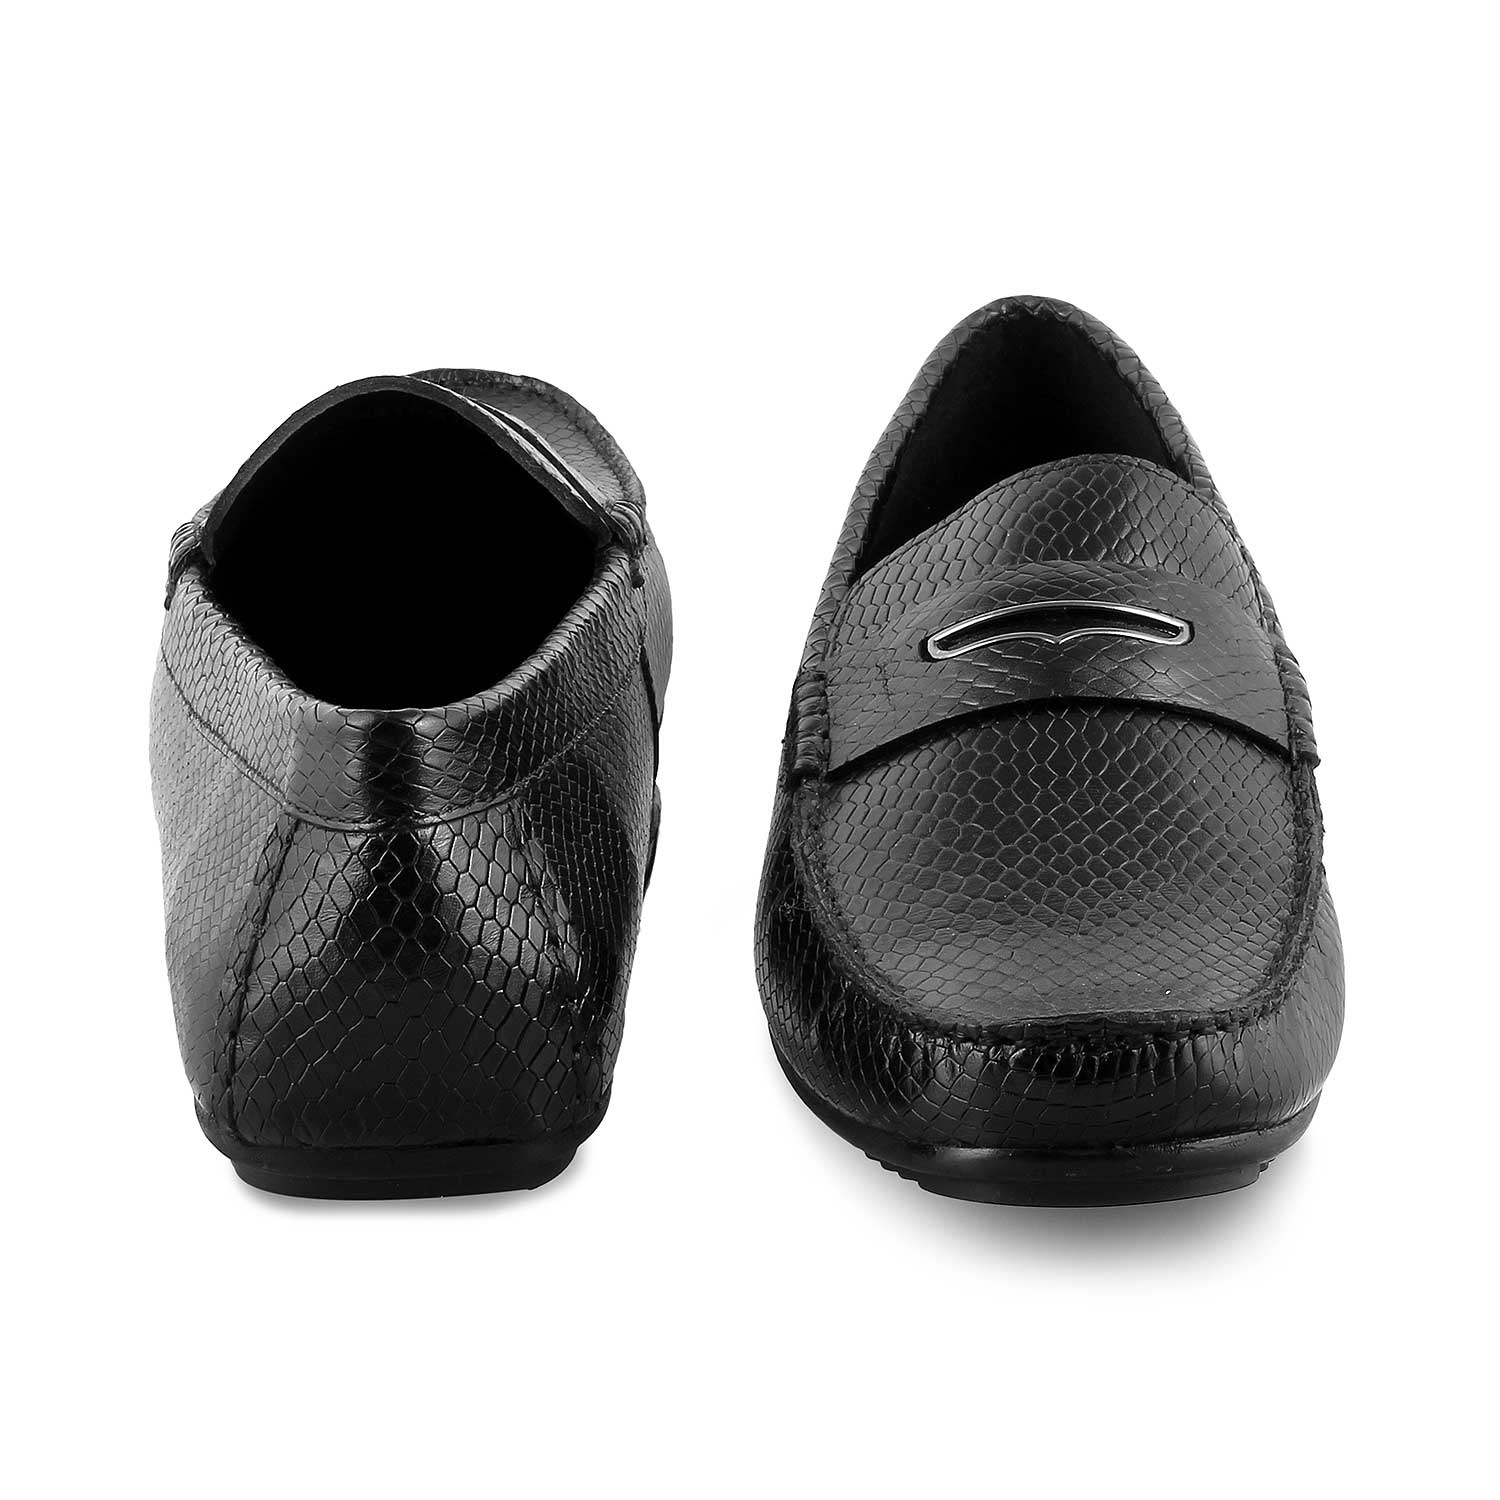 Tresmode-The Astro Black Men's Leather Loafers Tresmode-Tresmode